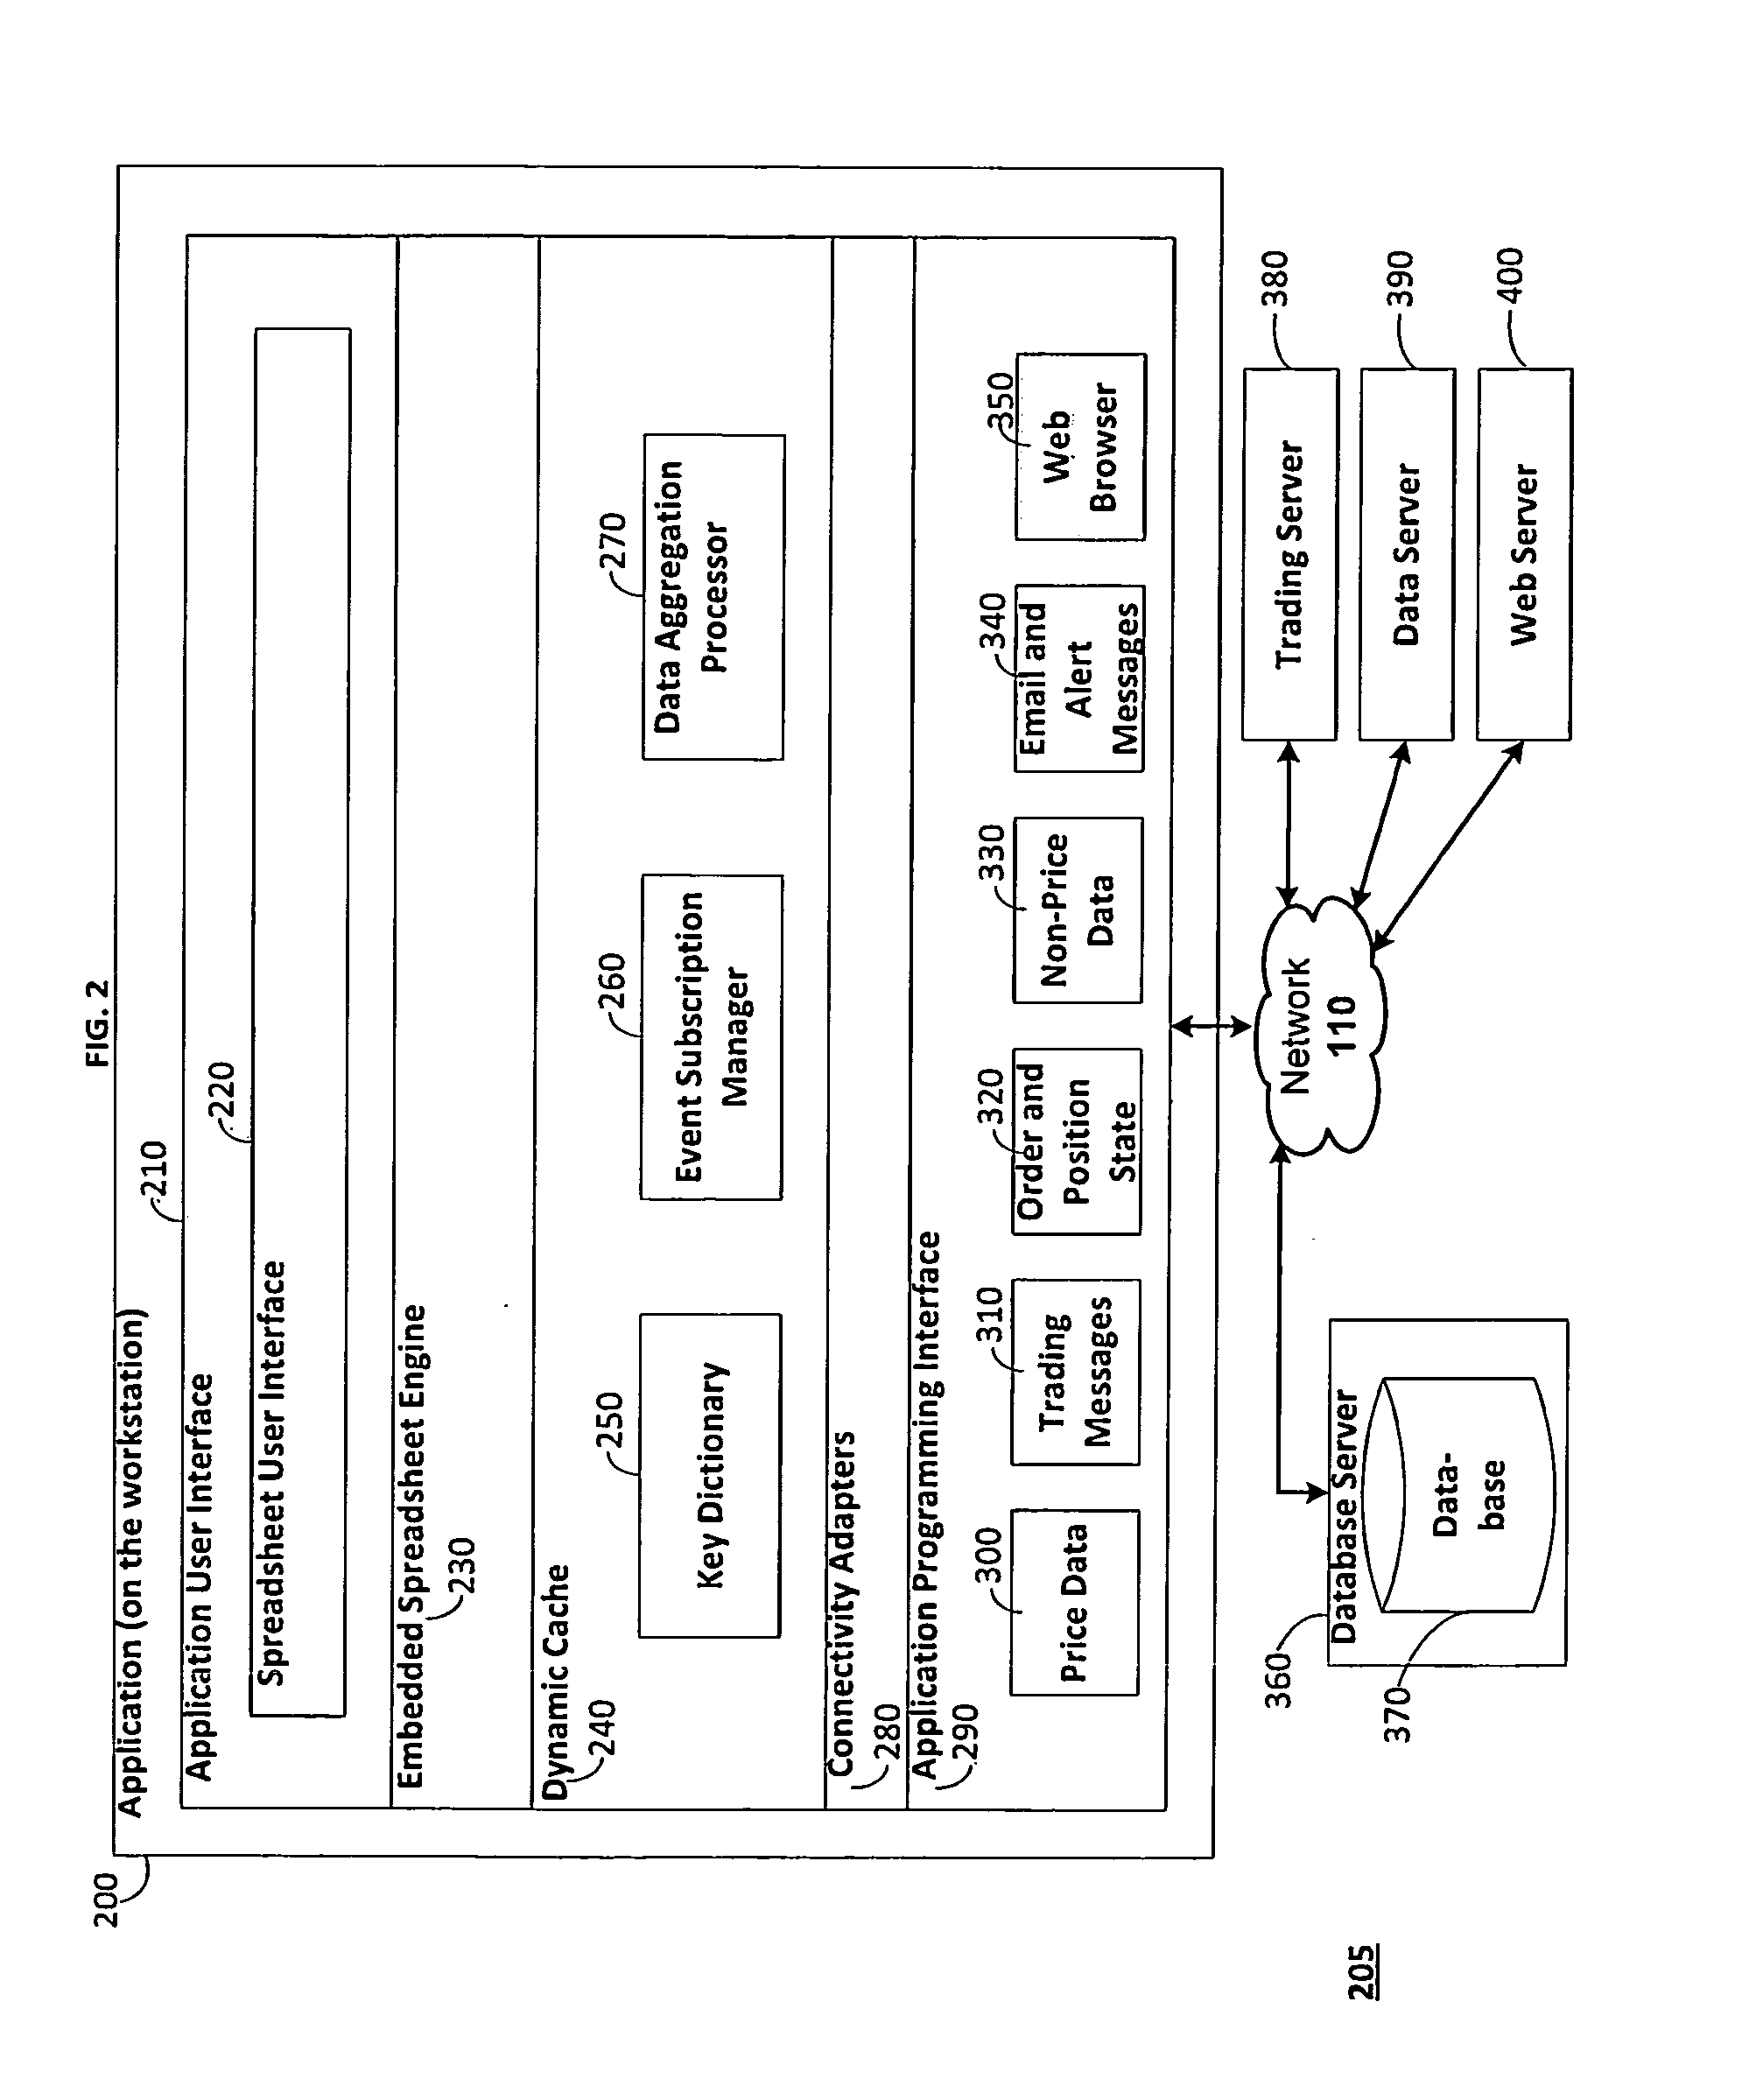 Systems and methods for trading using an embedded spreadsheet engine and user interface